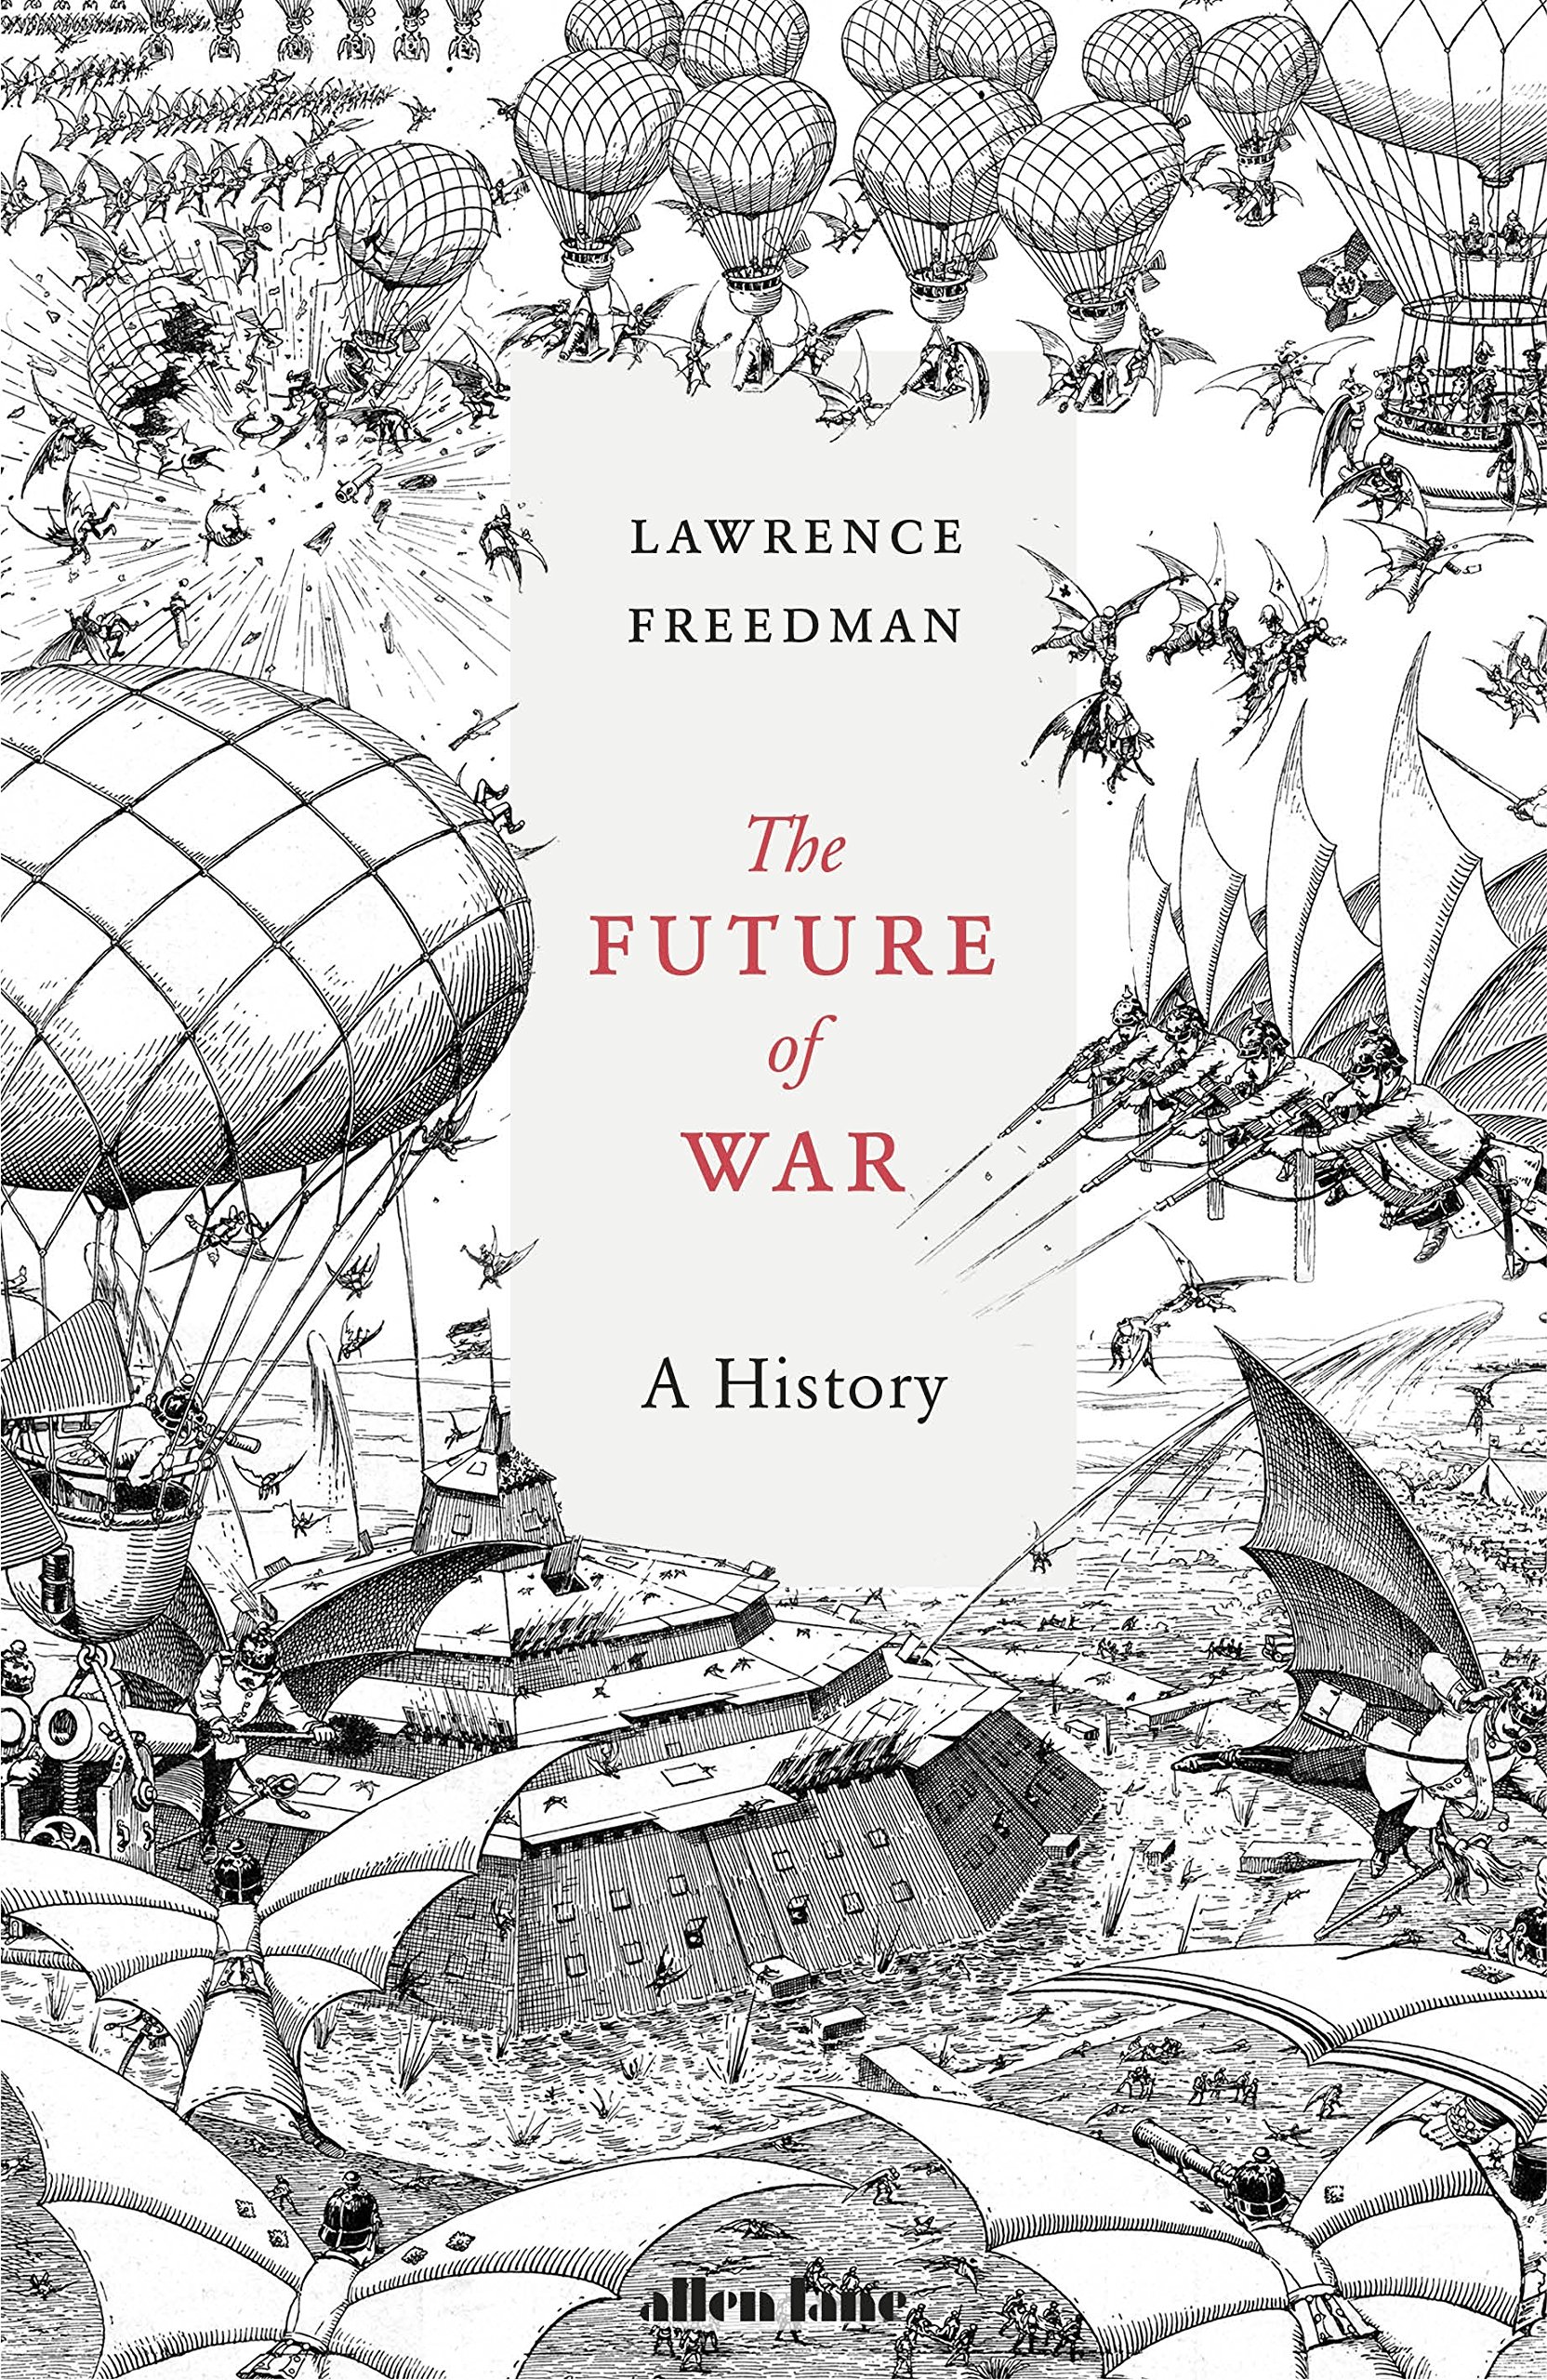 The Future of War: A History | Lawrence Freedman